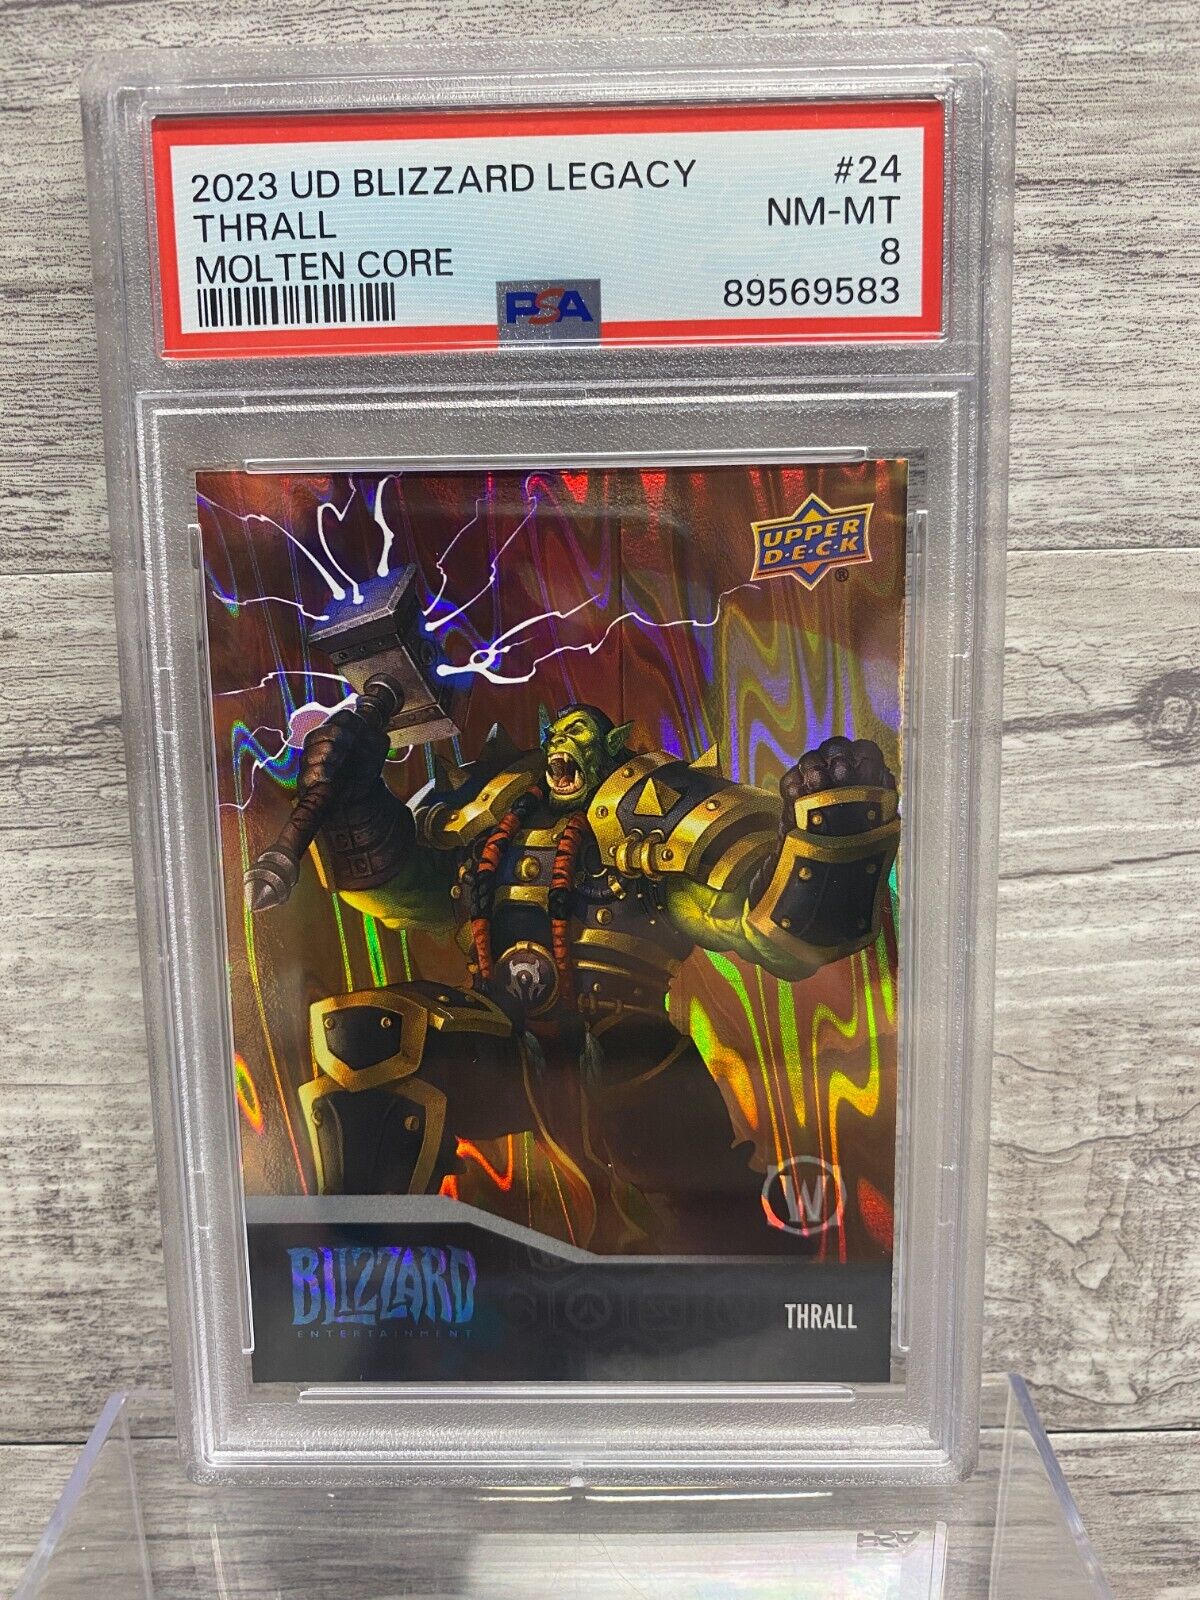 2023 Upper Deck Blizzard Legacy Collection Thrall Molten Core PSA 8 NM-MT